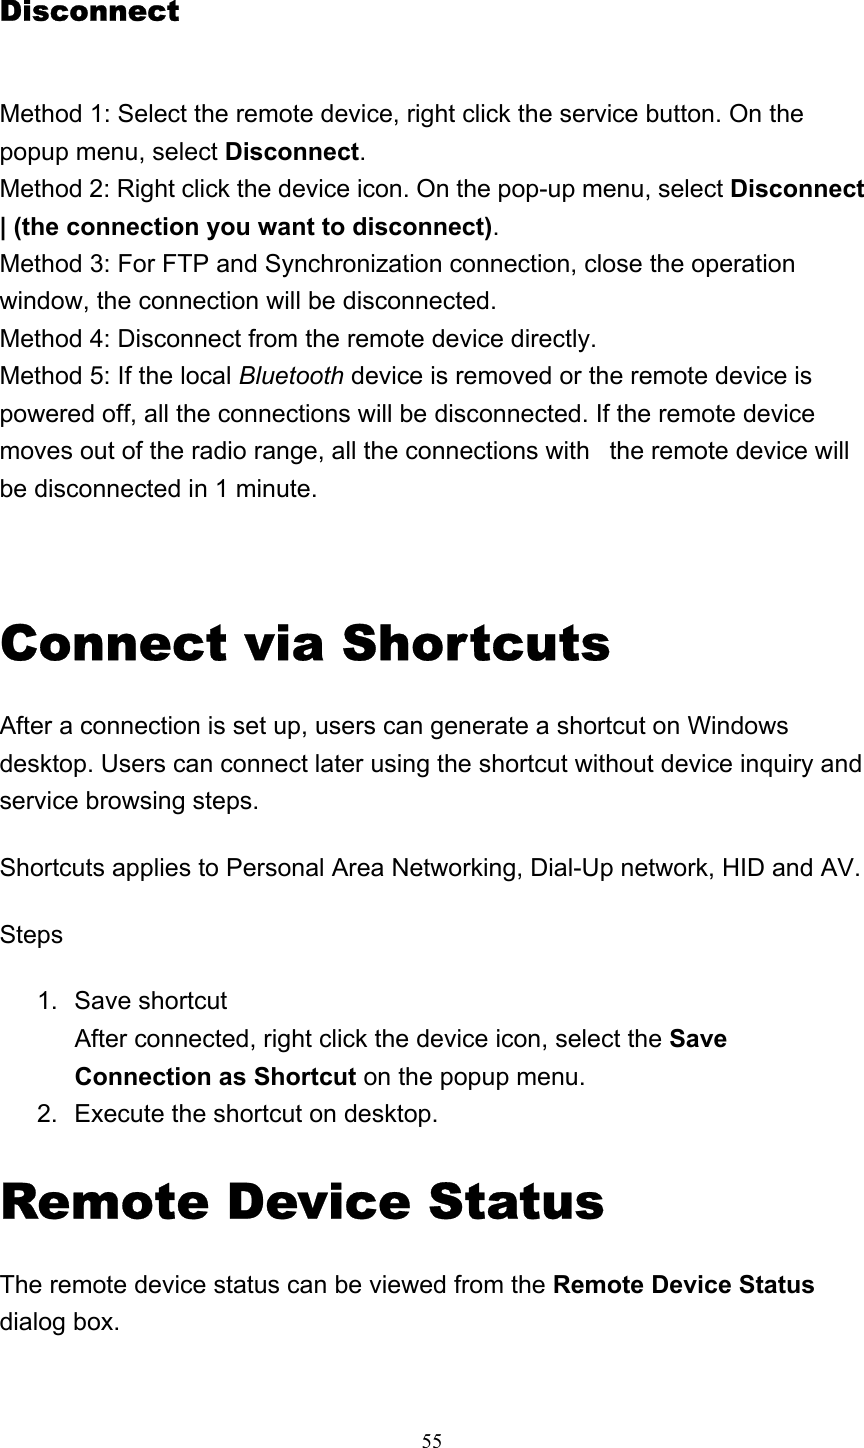   55Disconnect Method 1: Select the remote device, right click the service button. On the popup menu, select Disconnect. Method 2: Right click the device icon. On the pop-up menu, select Disconnect | (the connection you want to disconnect). Method 3: For FTP and Synchronization connection, close the operation window, the connection will be disconnected. Method 4: Disconnect from the remote device directly. Method 5: If the local Bluetooth device is removed or the remote device is powered off, all the connections will be disconnected. If the remote device moves out of the radio range, all the connections with   the remote device will be disconnected in 1 minute.   Connect via Shortcuts After a connection is set up, users can generate a shortcut on Windows desktop. Users can connect later using the shortcut without device inquiry and service browsing steps.  Shortcuts applies to Personal Area Networking, Dial-Up network, HID and AV. Steps 1. Save shortcut After connected, right click the device icon, select the Save Connection as Shortcut on the popup menu.   2.  Execute the shortcut on desktop.   Remote Device Status The remote device status can be viewed from the Remote Device Status dialog box. 